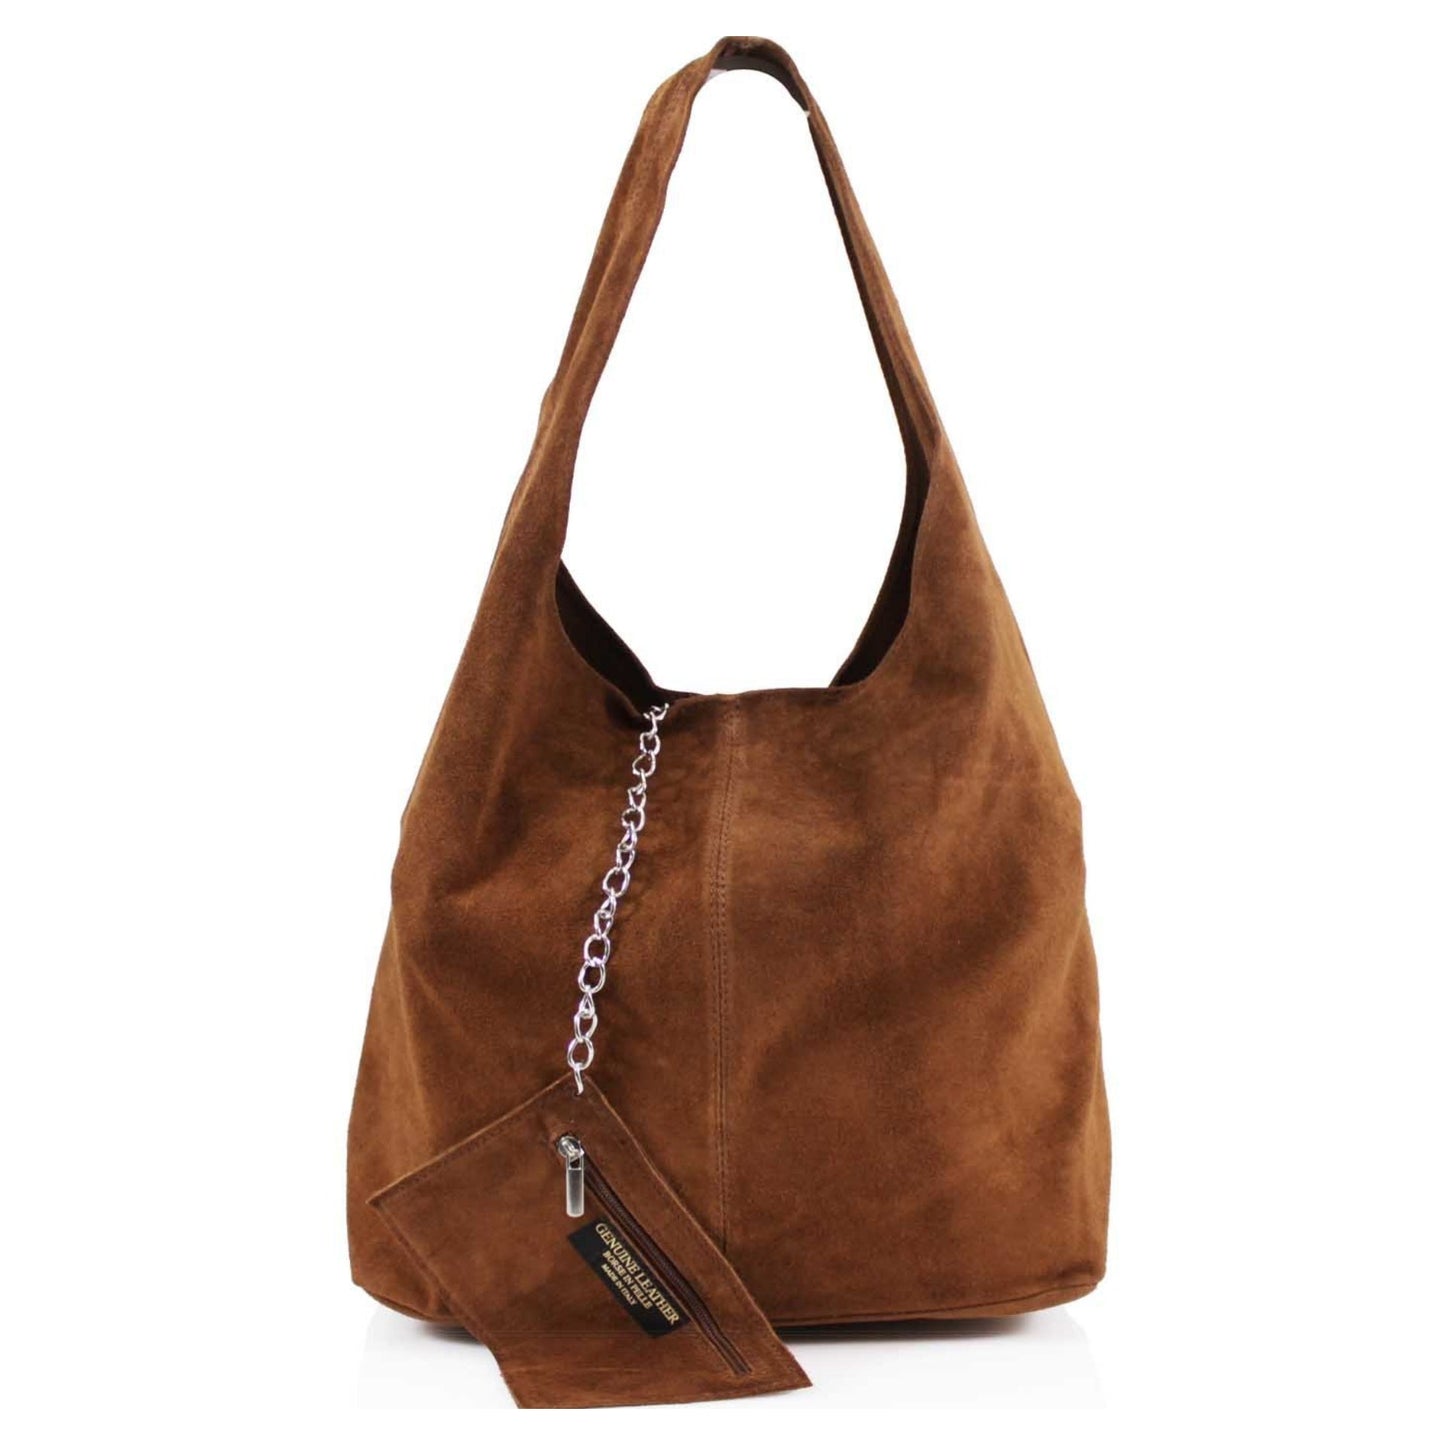 Genuine Suede Tan Leather Large Hobo Shopper